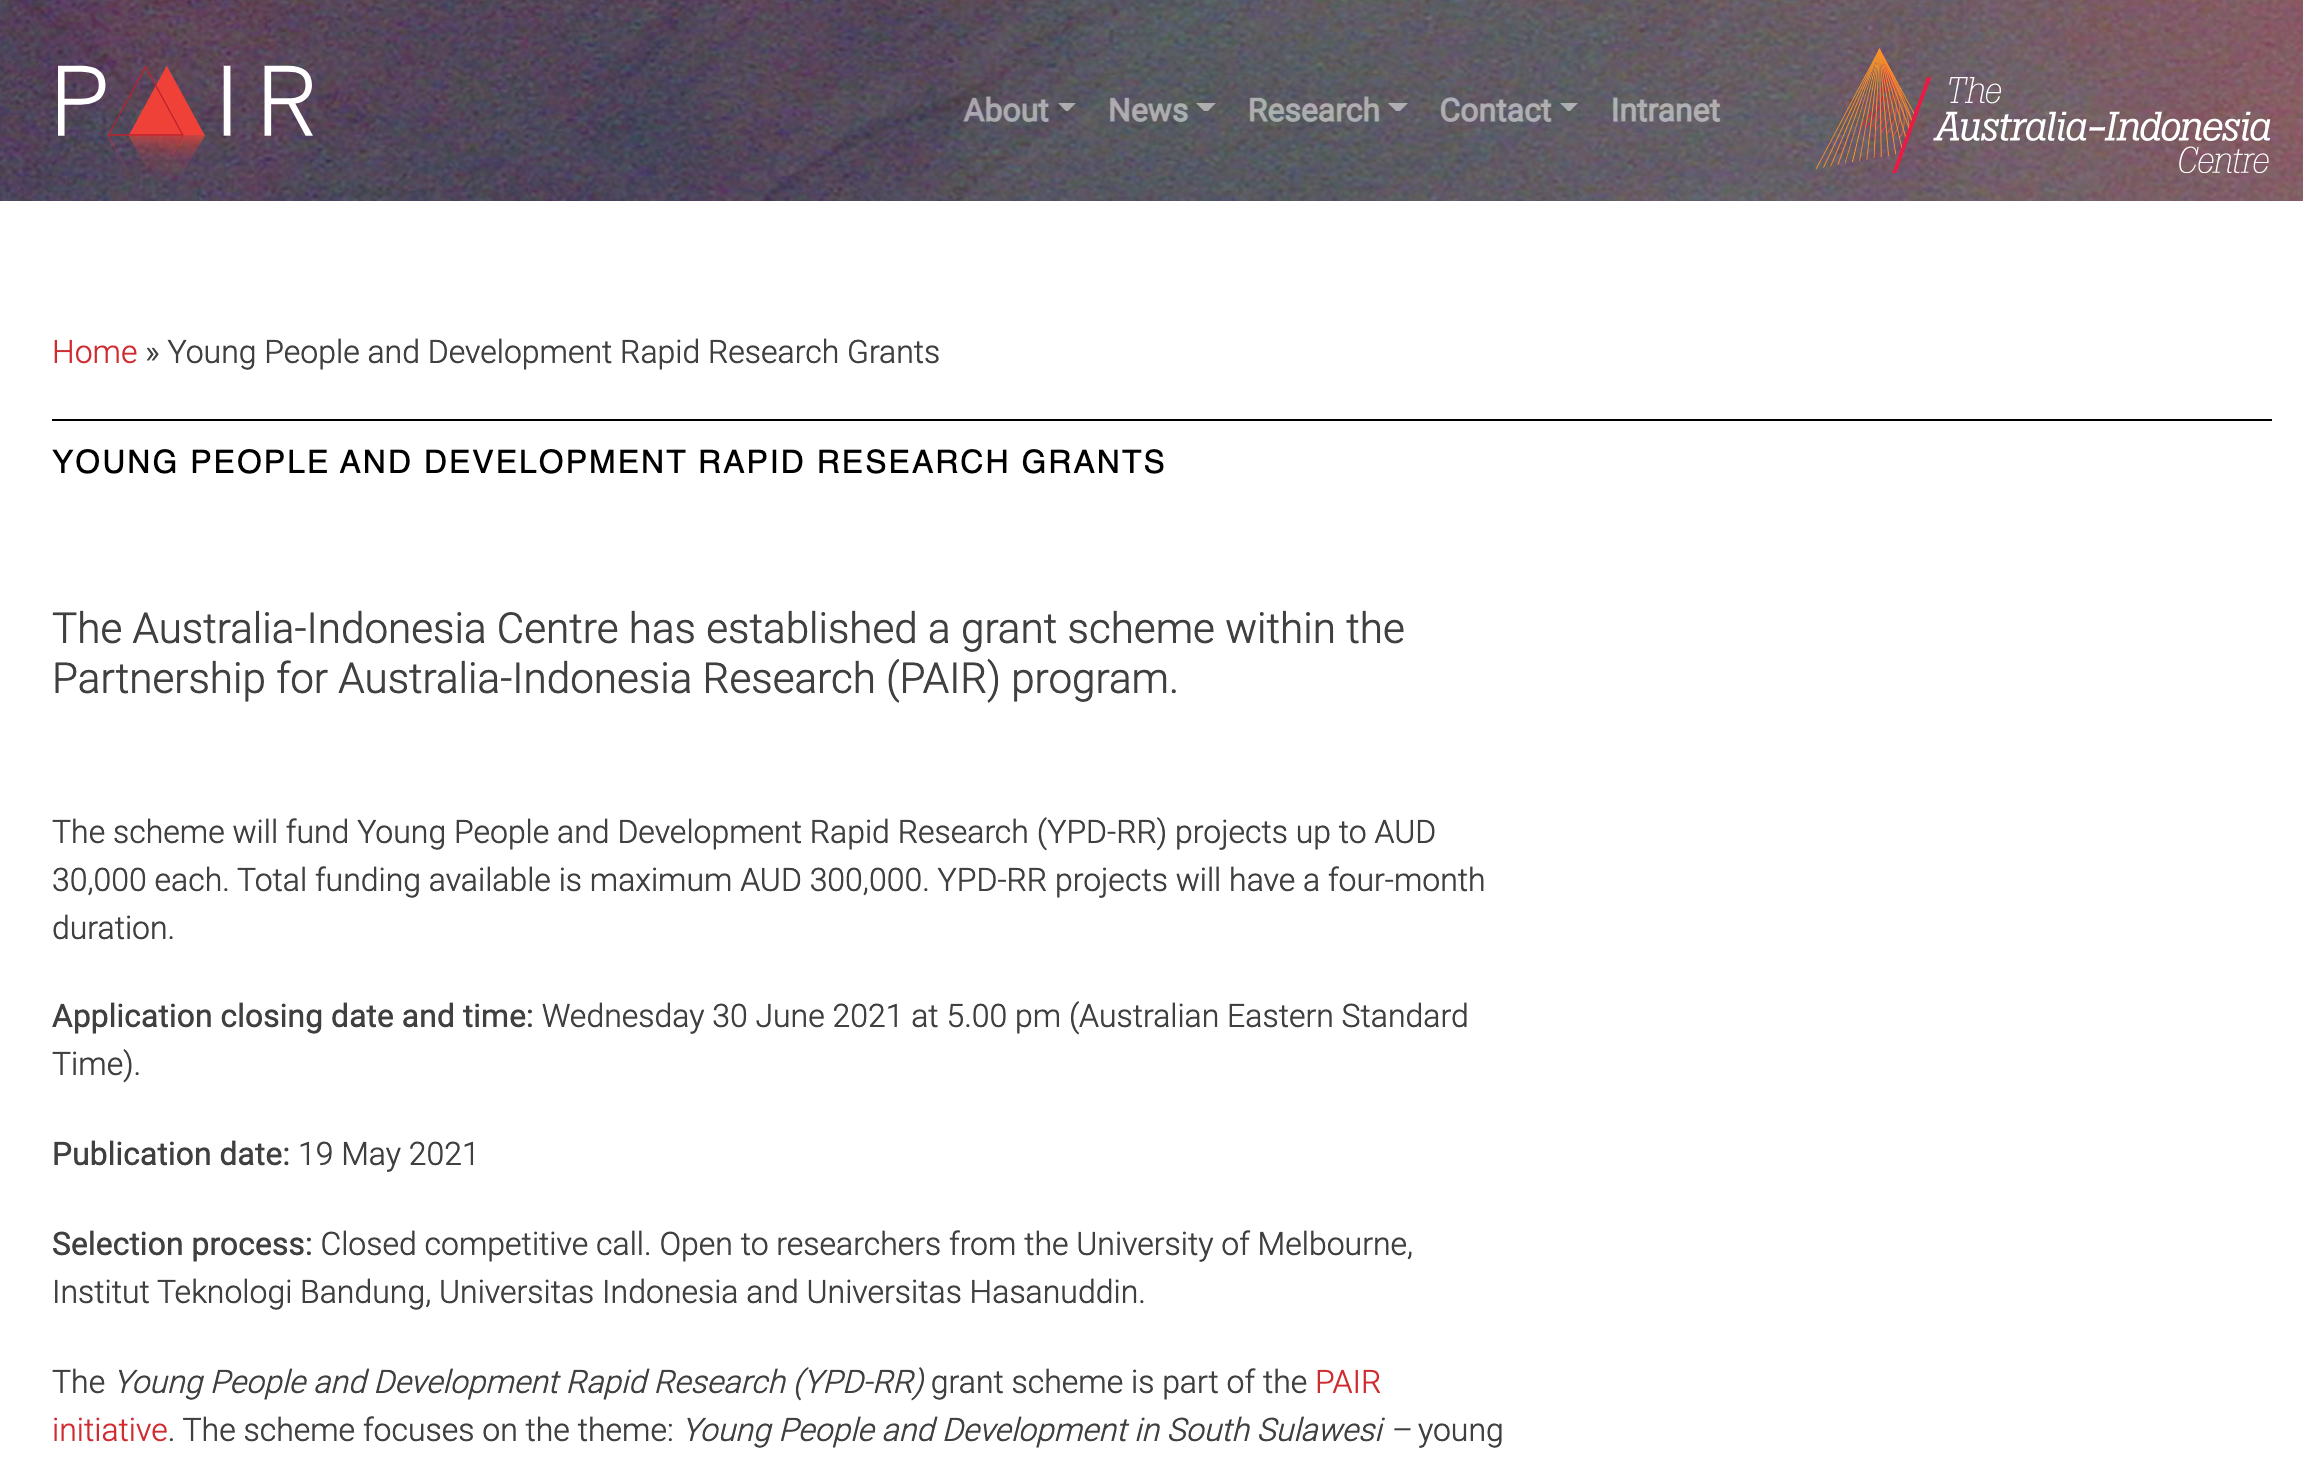 AIC PAIR – Young People and Development Rapid Research Grant